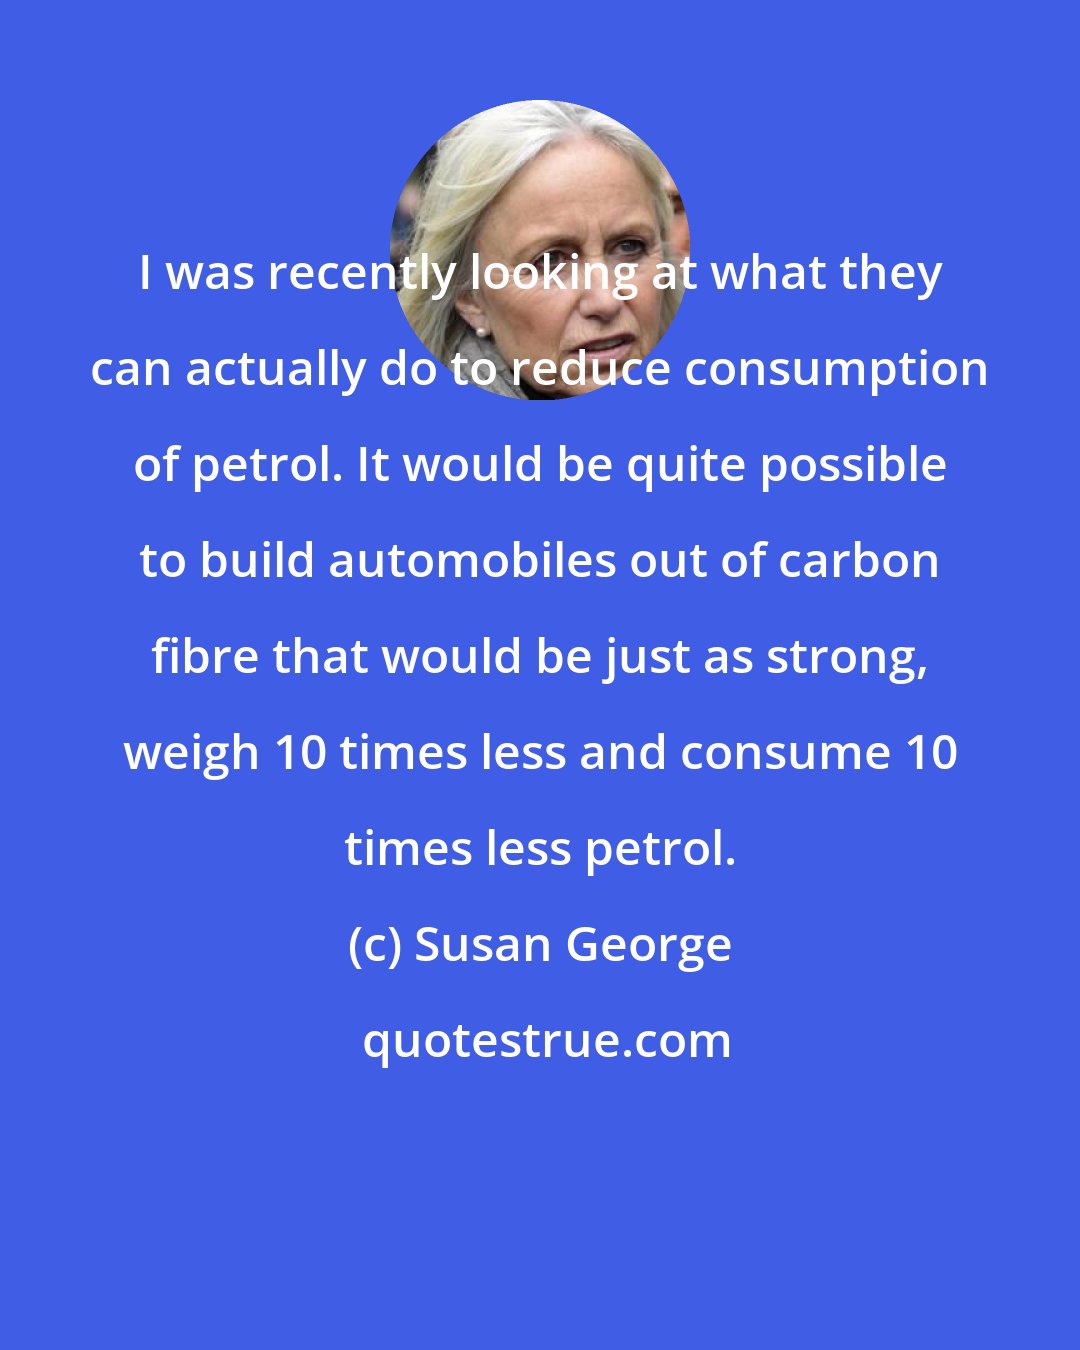 Susan George: I was recently looking at what they can actually do to reduce consumption of petrol. It would be quite possible to build automobiles out of carbon fibre that would be just as strong, weigh 10 times less and consume 10 times less petrol.